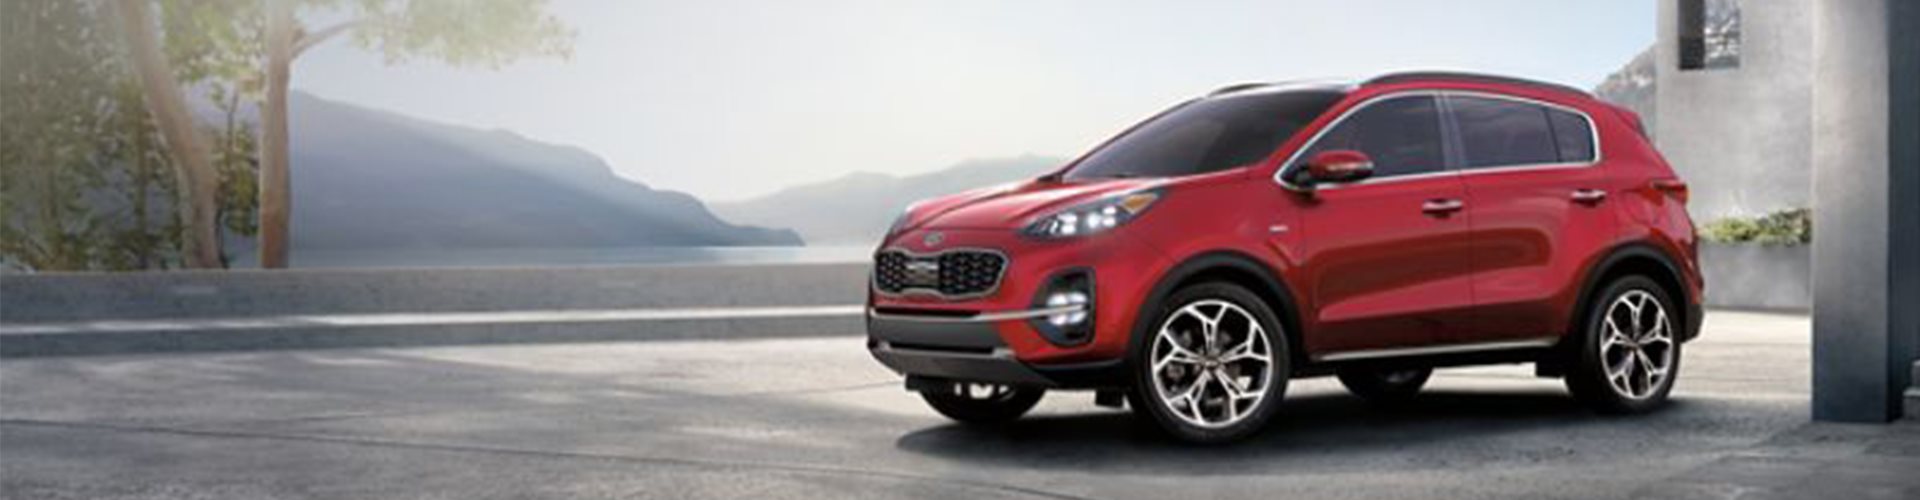 Kia Sportage Engines, Driving and Performance